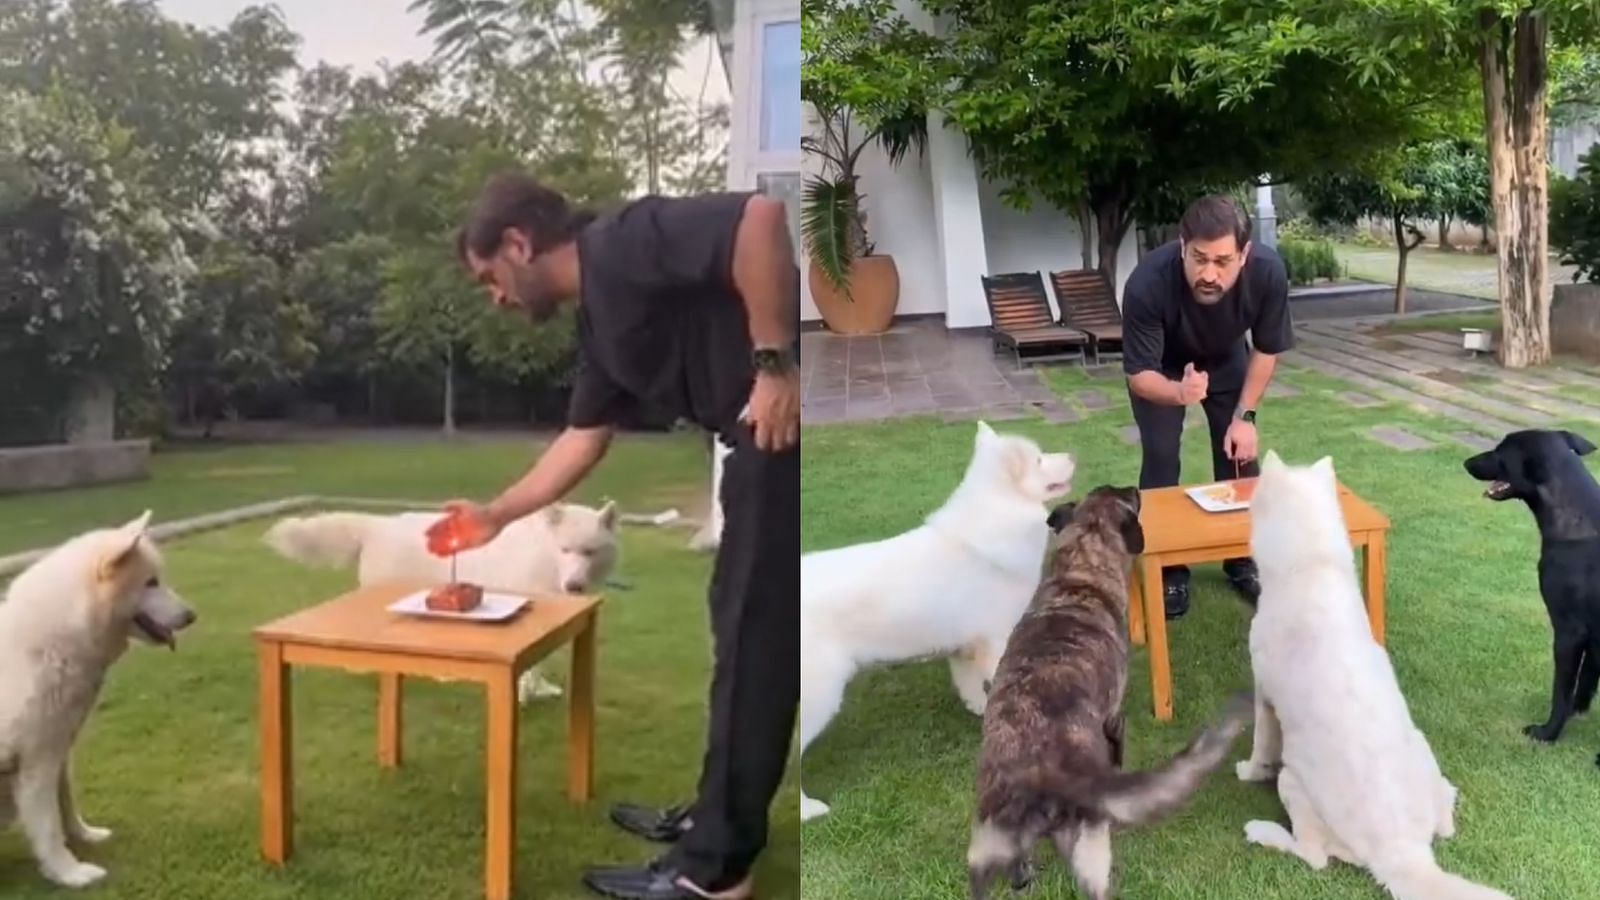 MS Dhoni celebrated his birthday with his four pet dogs (Image: Instagram)